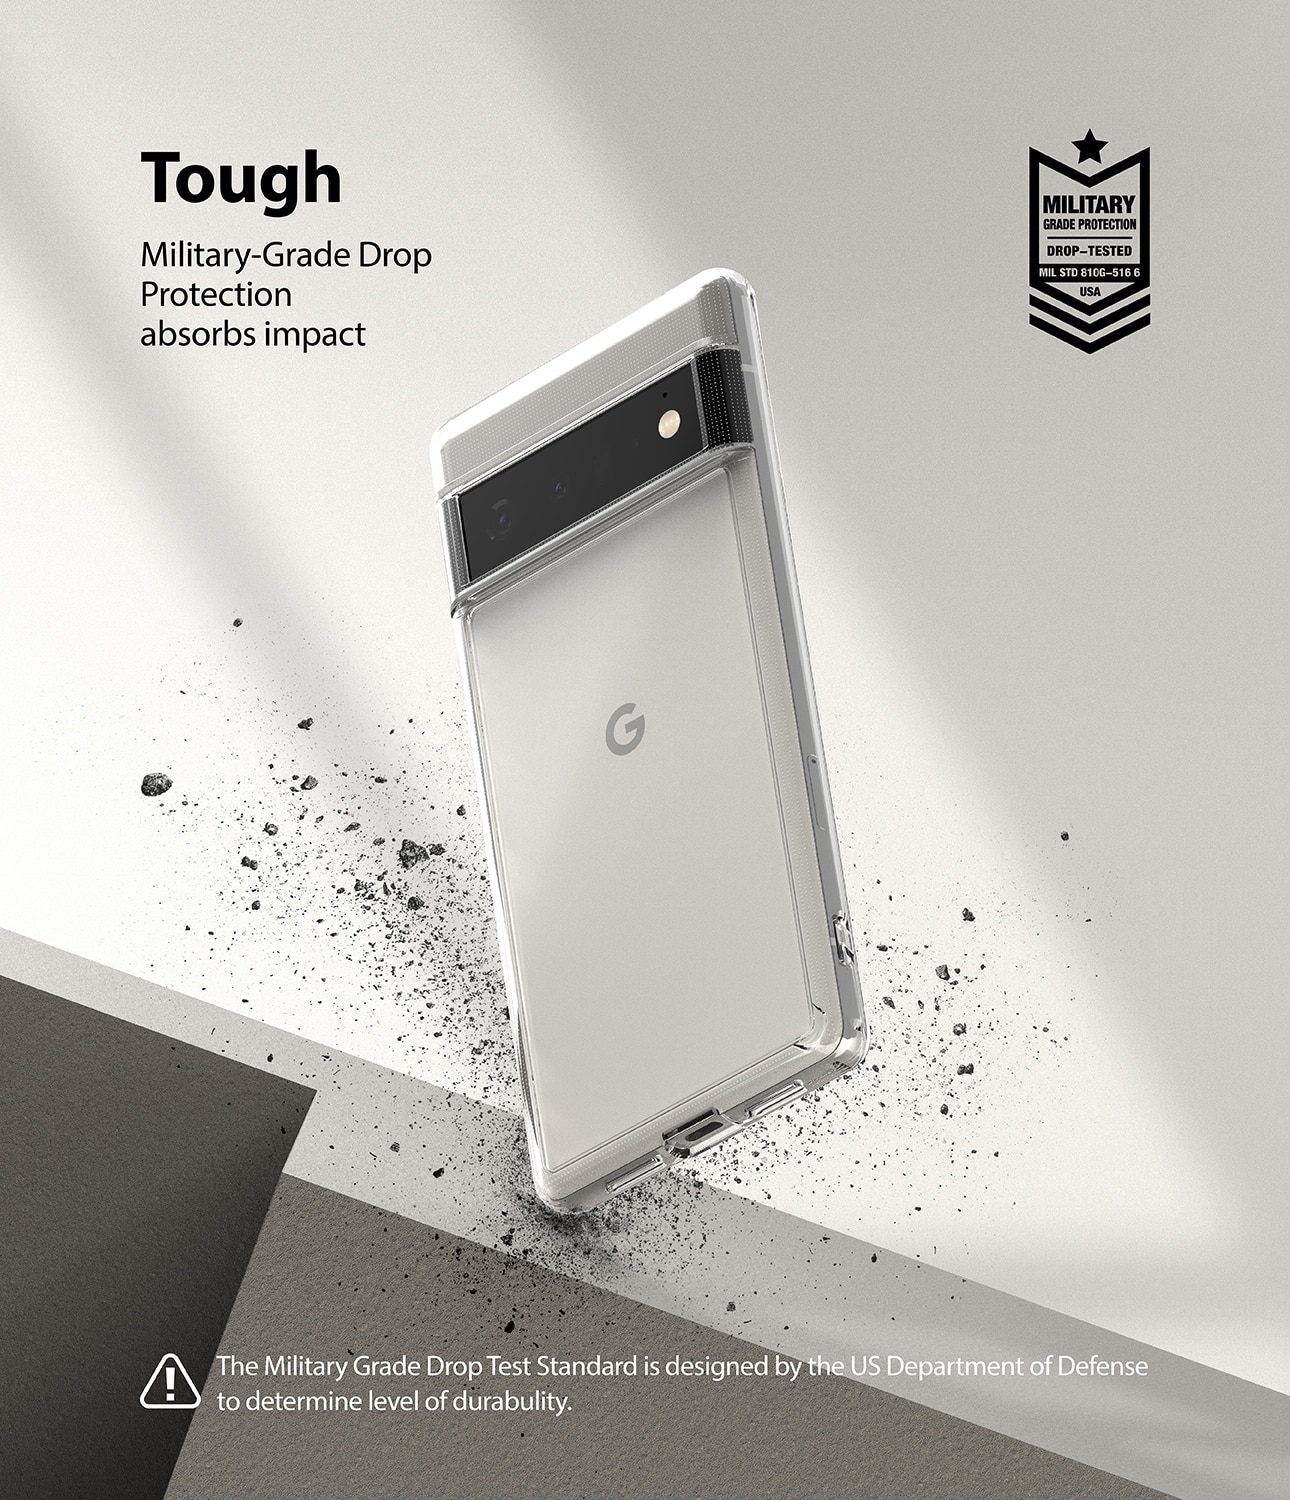 Cover Fusion Google Pixel 6 Pro Clear